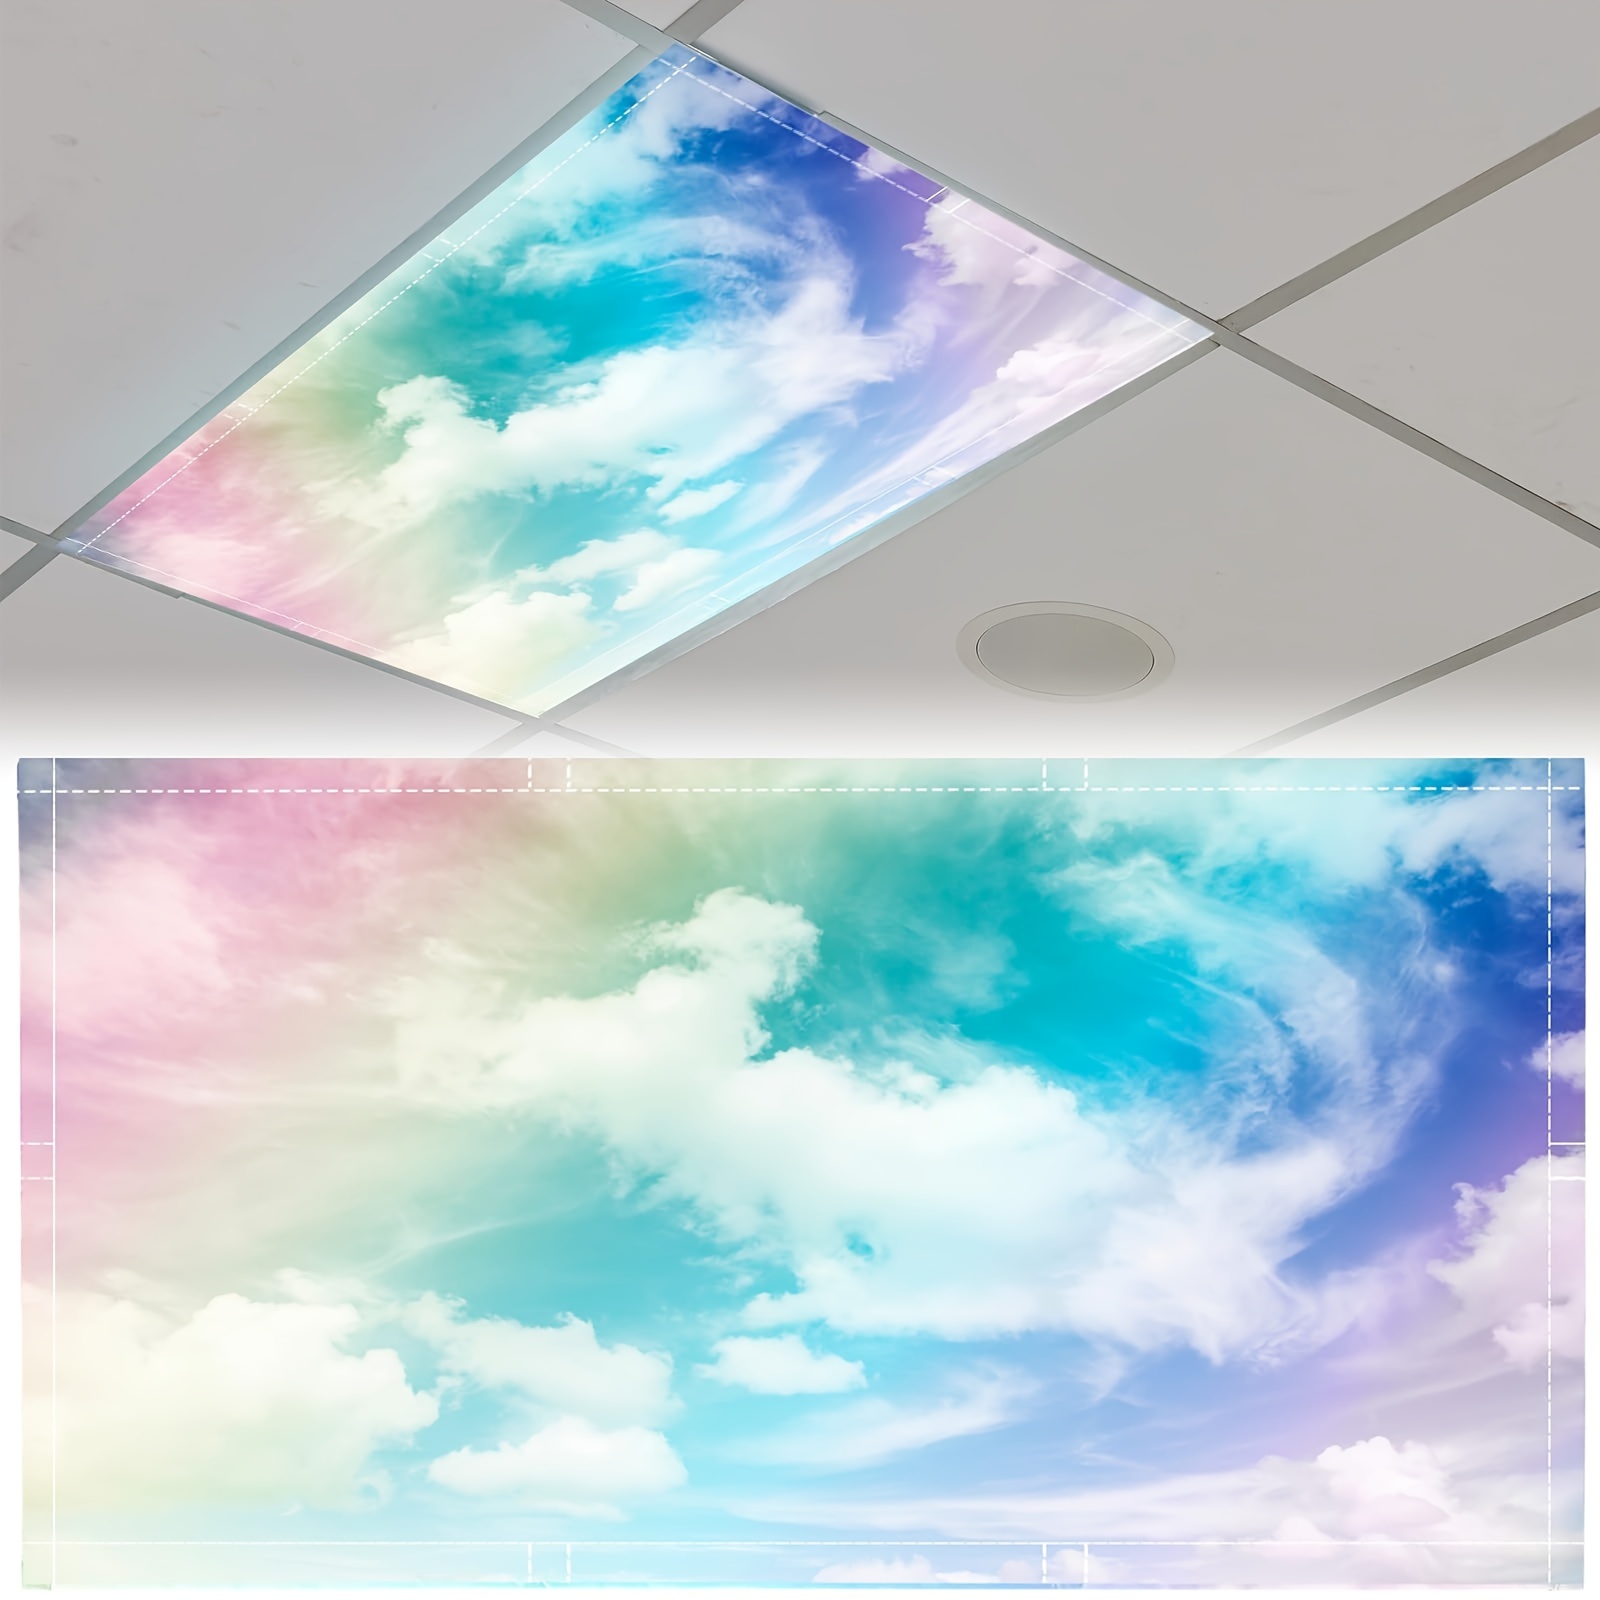 

Colorful Cloud Magnetic Fluorescent Ceiling Light Cover, 4x2 Ft - Perfect For Classroom & Home Office Decor